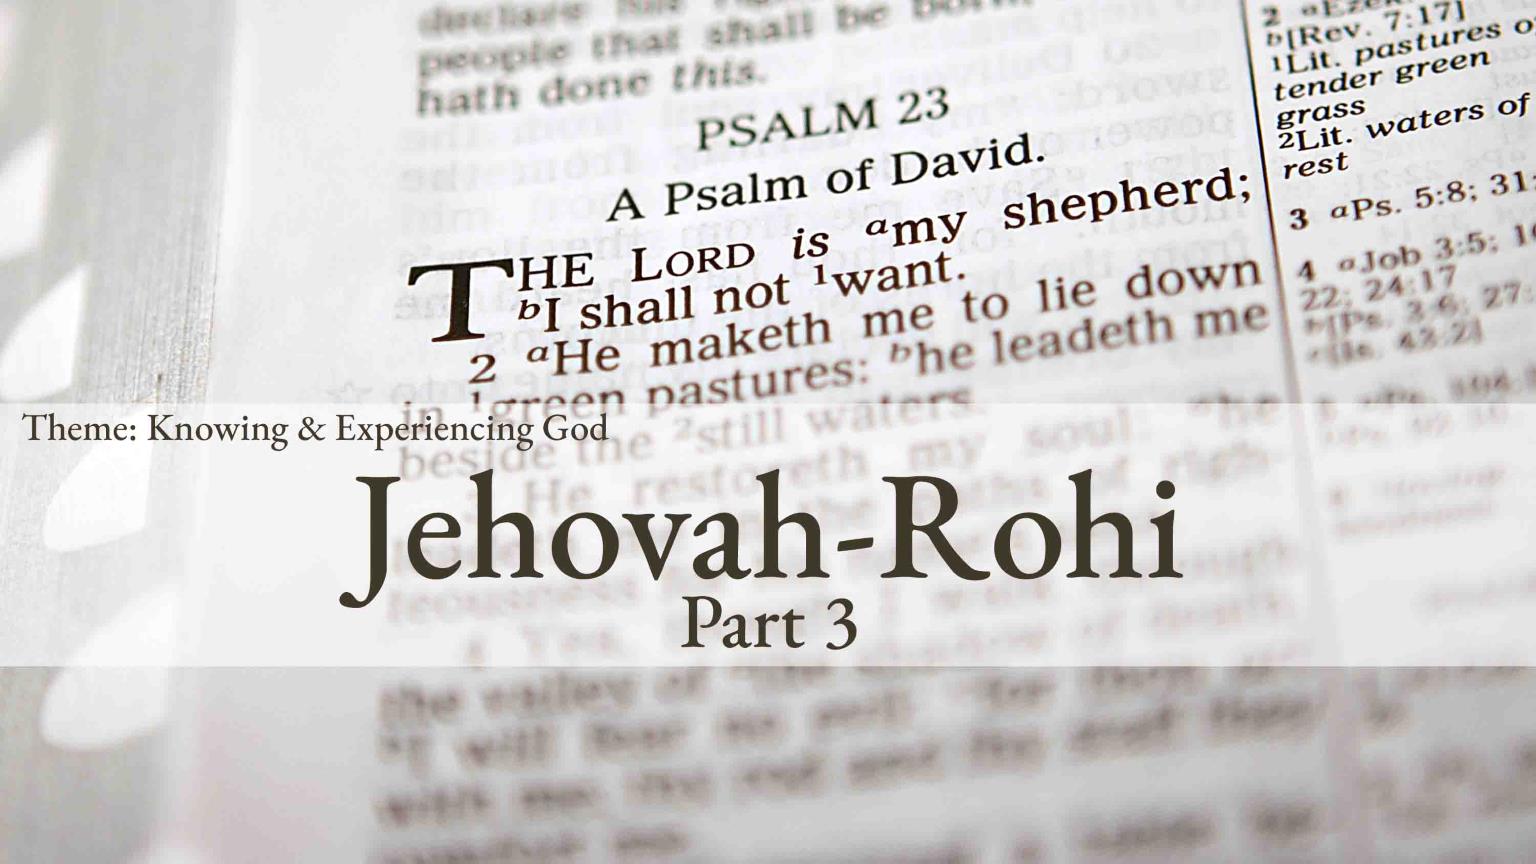 Jehovah-Rohi (Part 3)